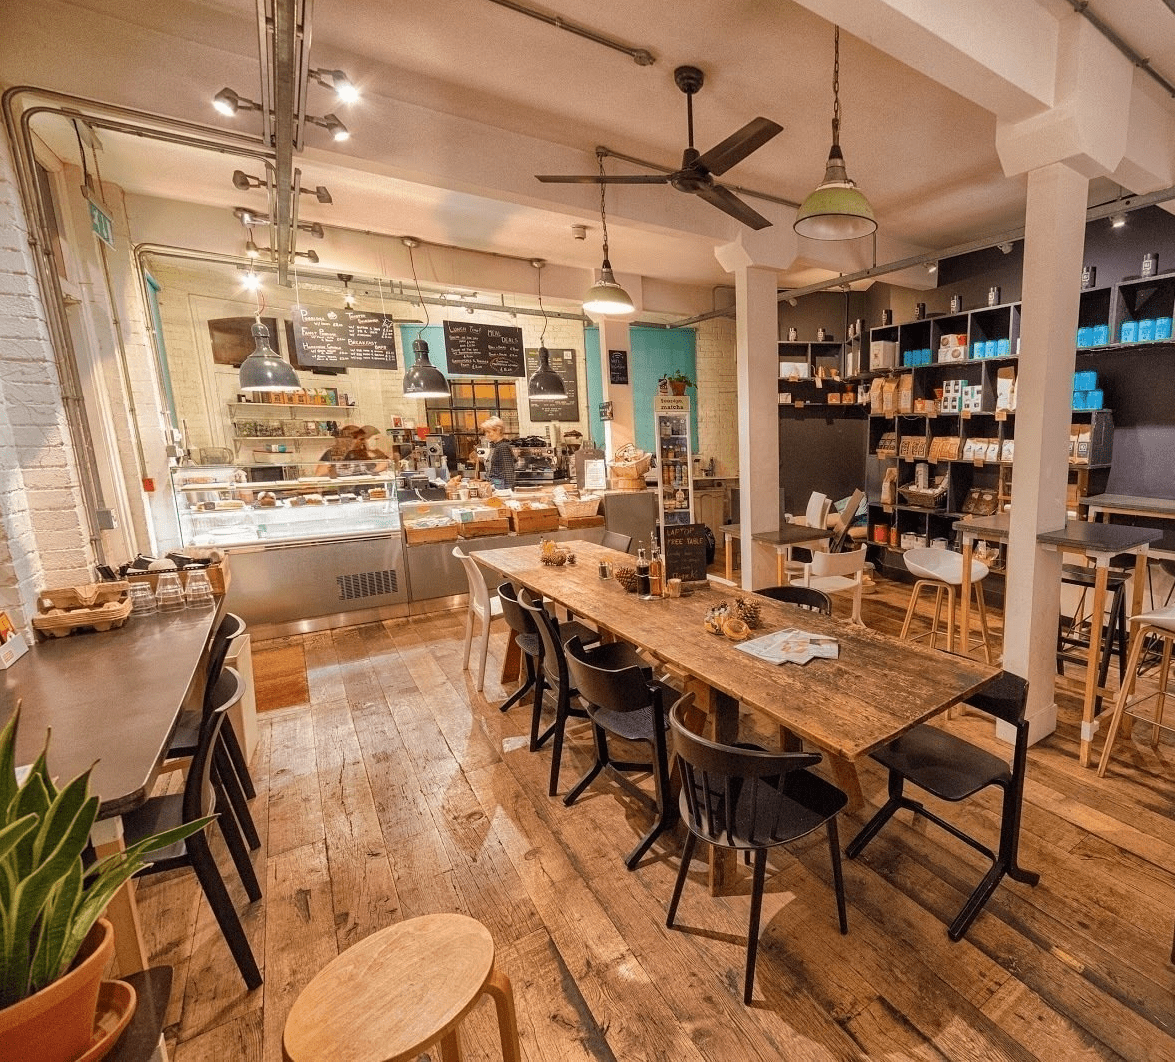 The best cafes for working in London | interiors at Hej coffee, South London